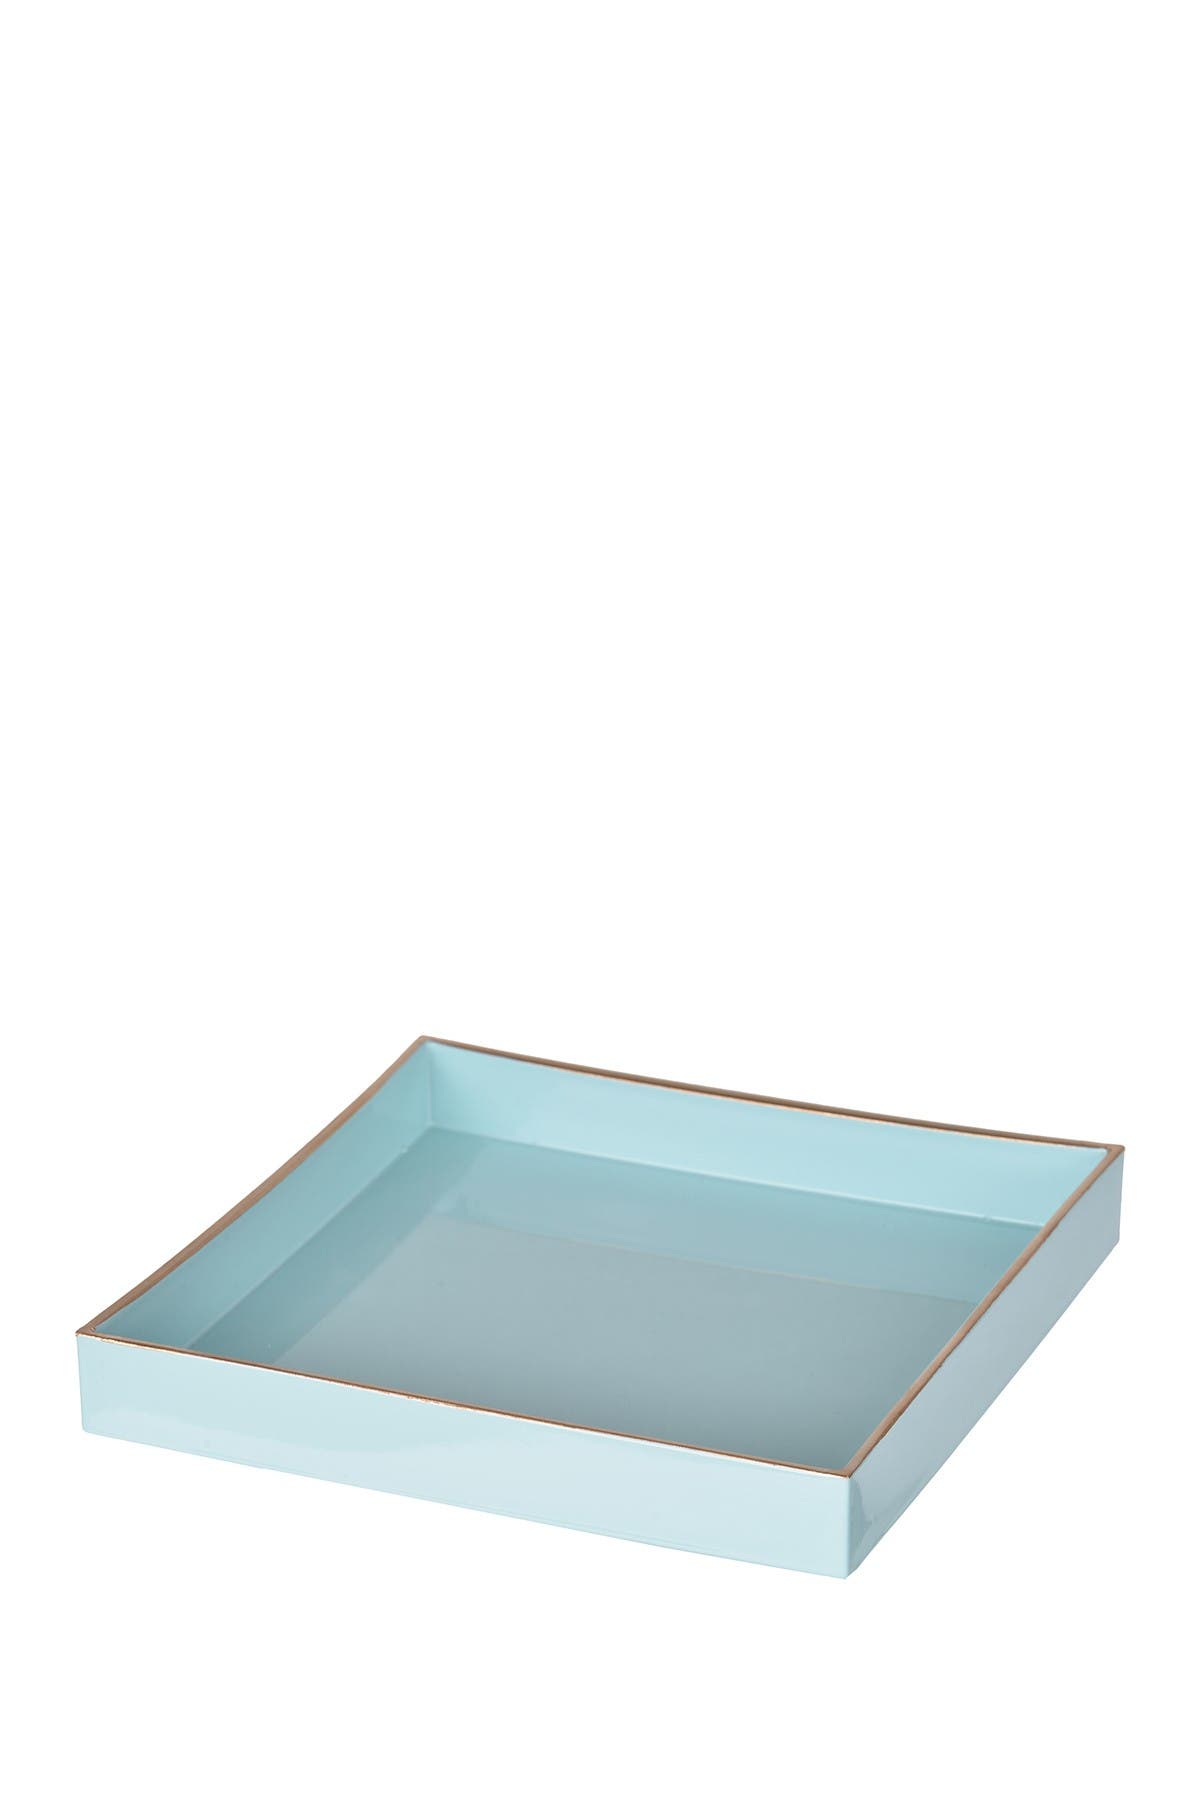 R16 Home Blue Mimosa Square Tray In Turquoise